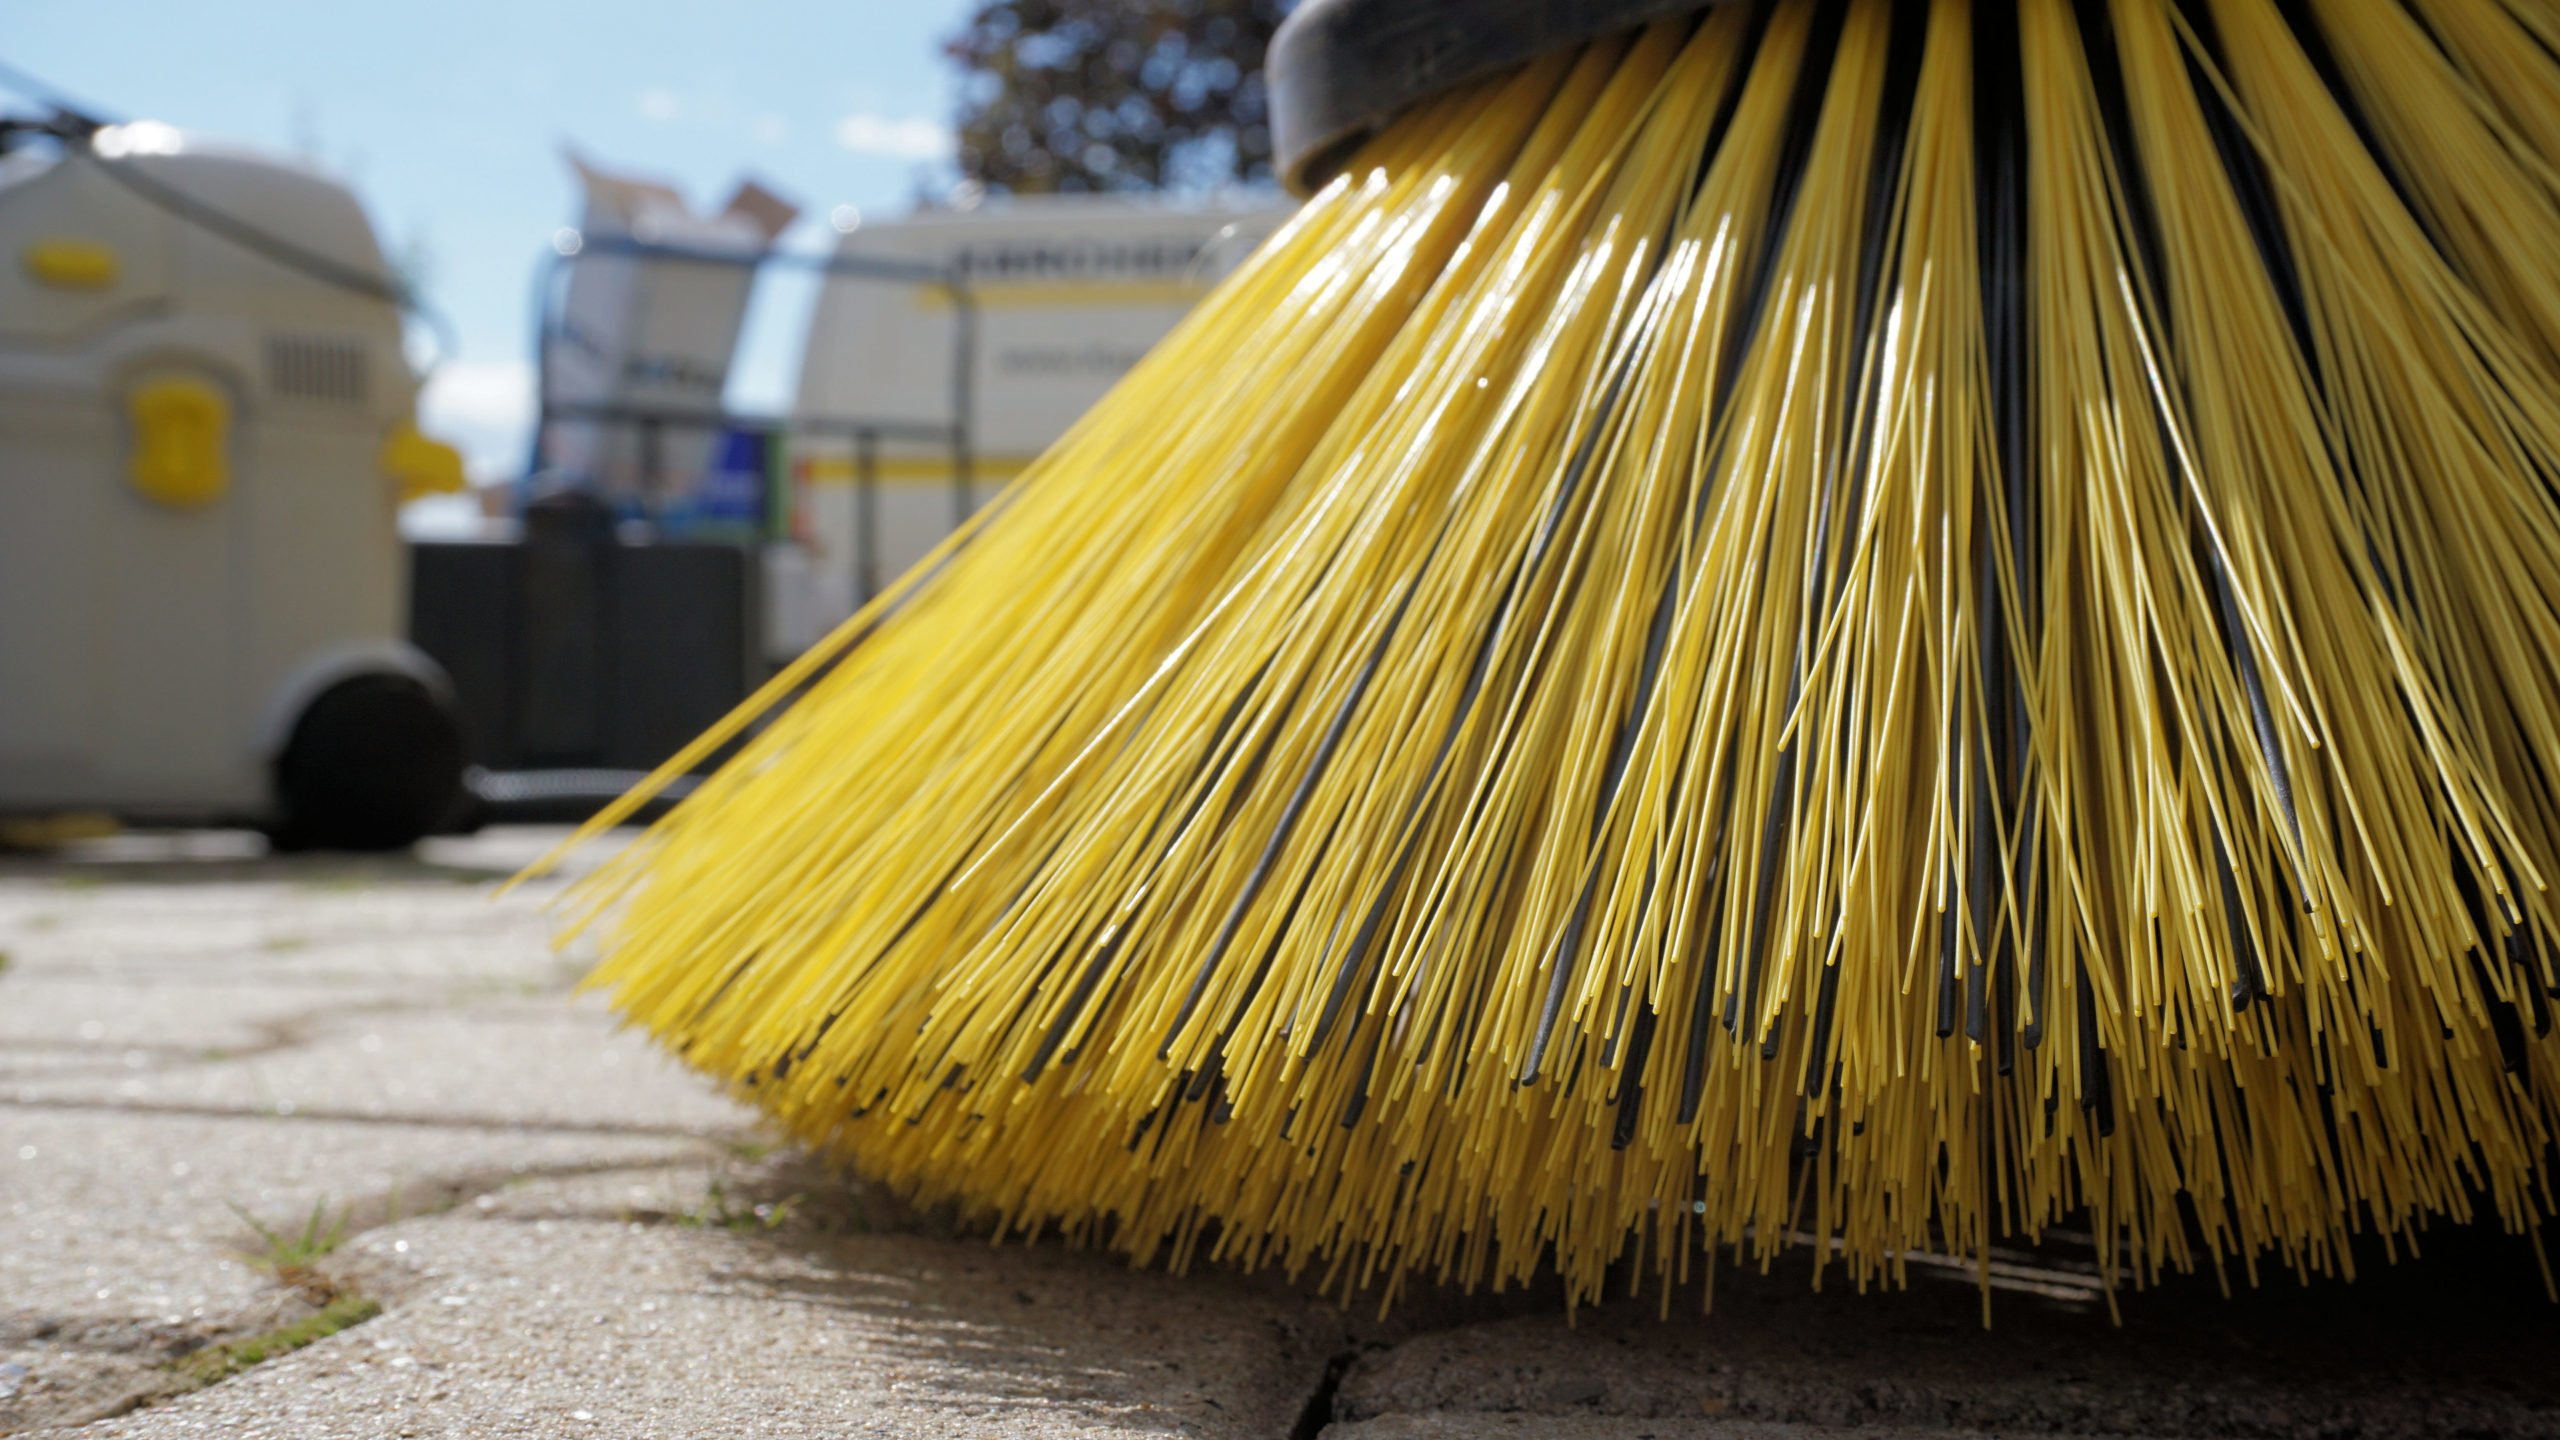 Close up of a street cleaner brush